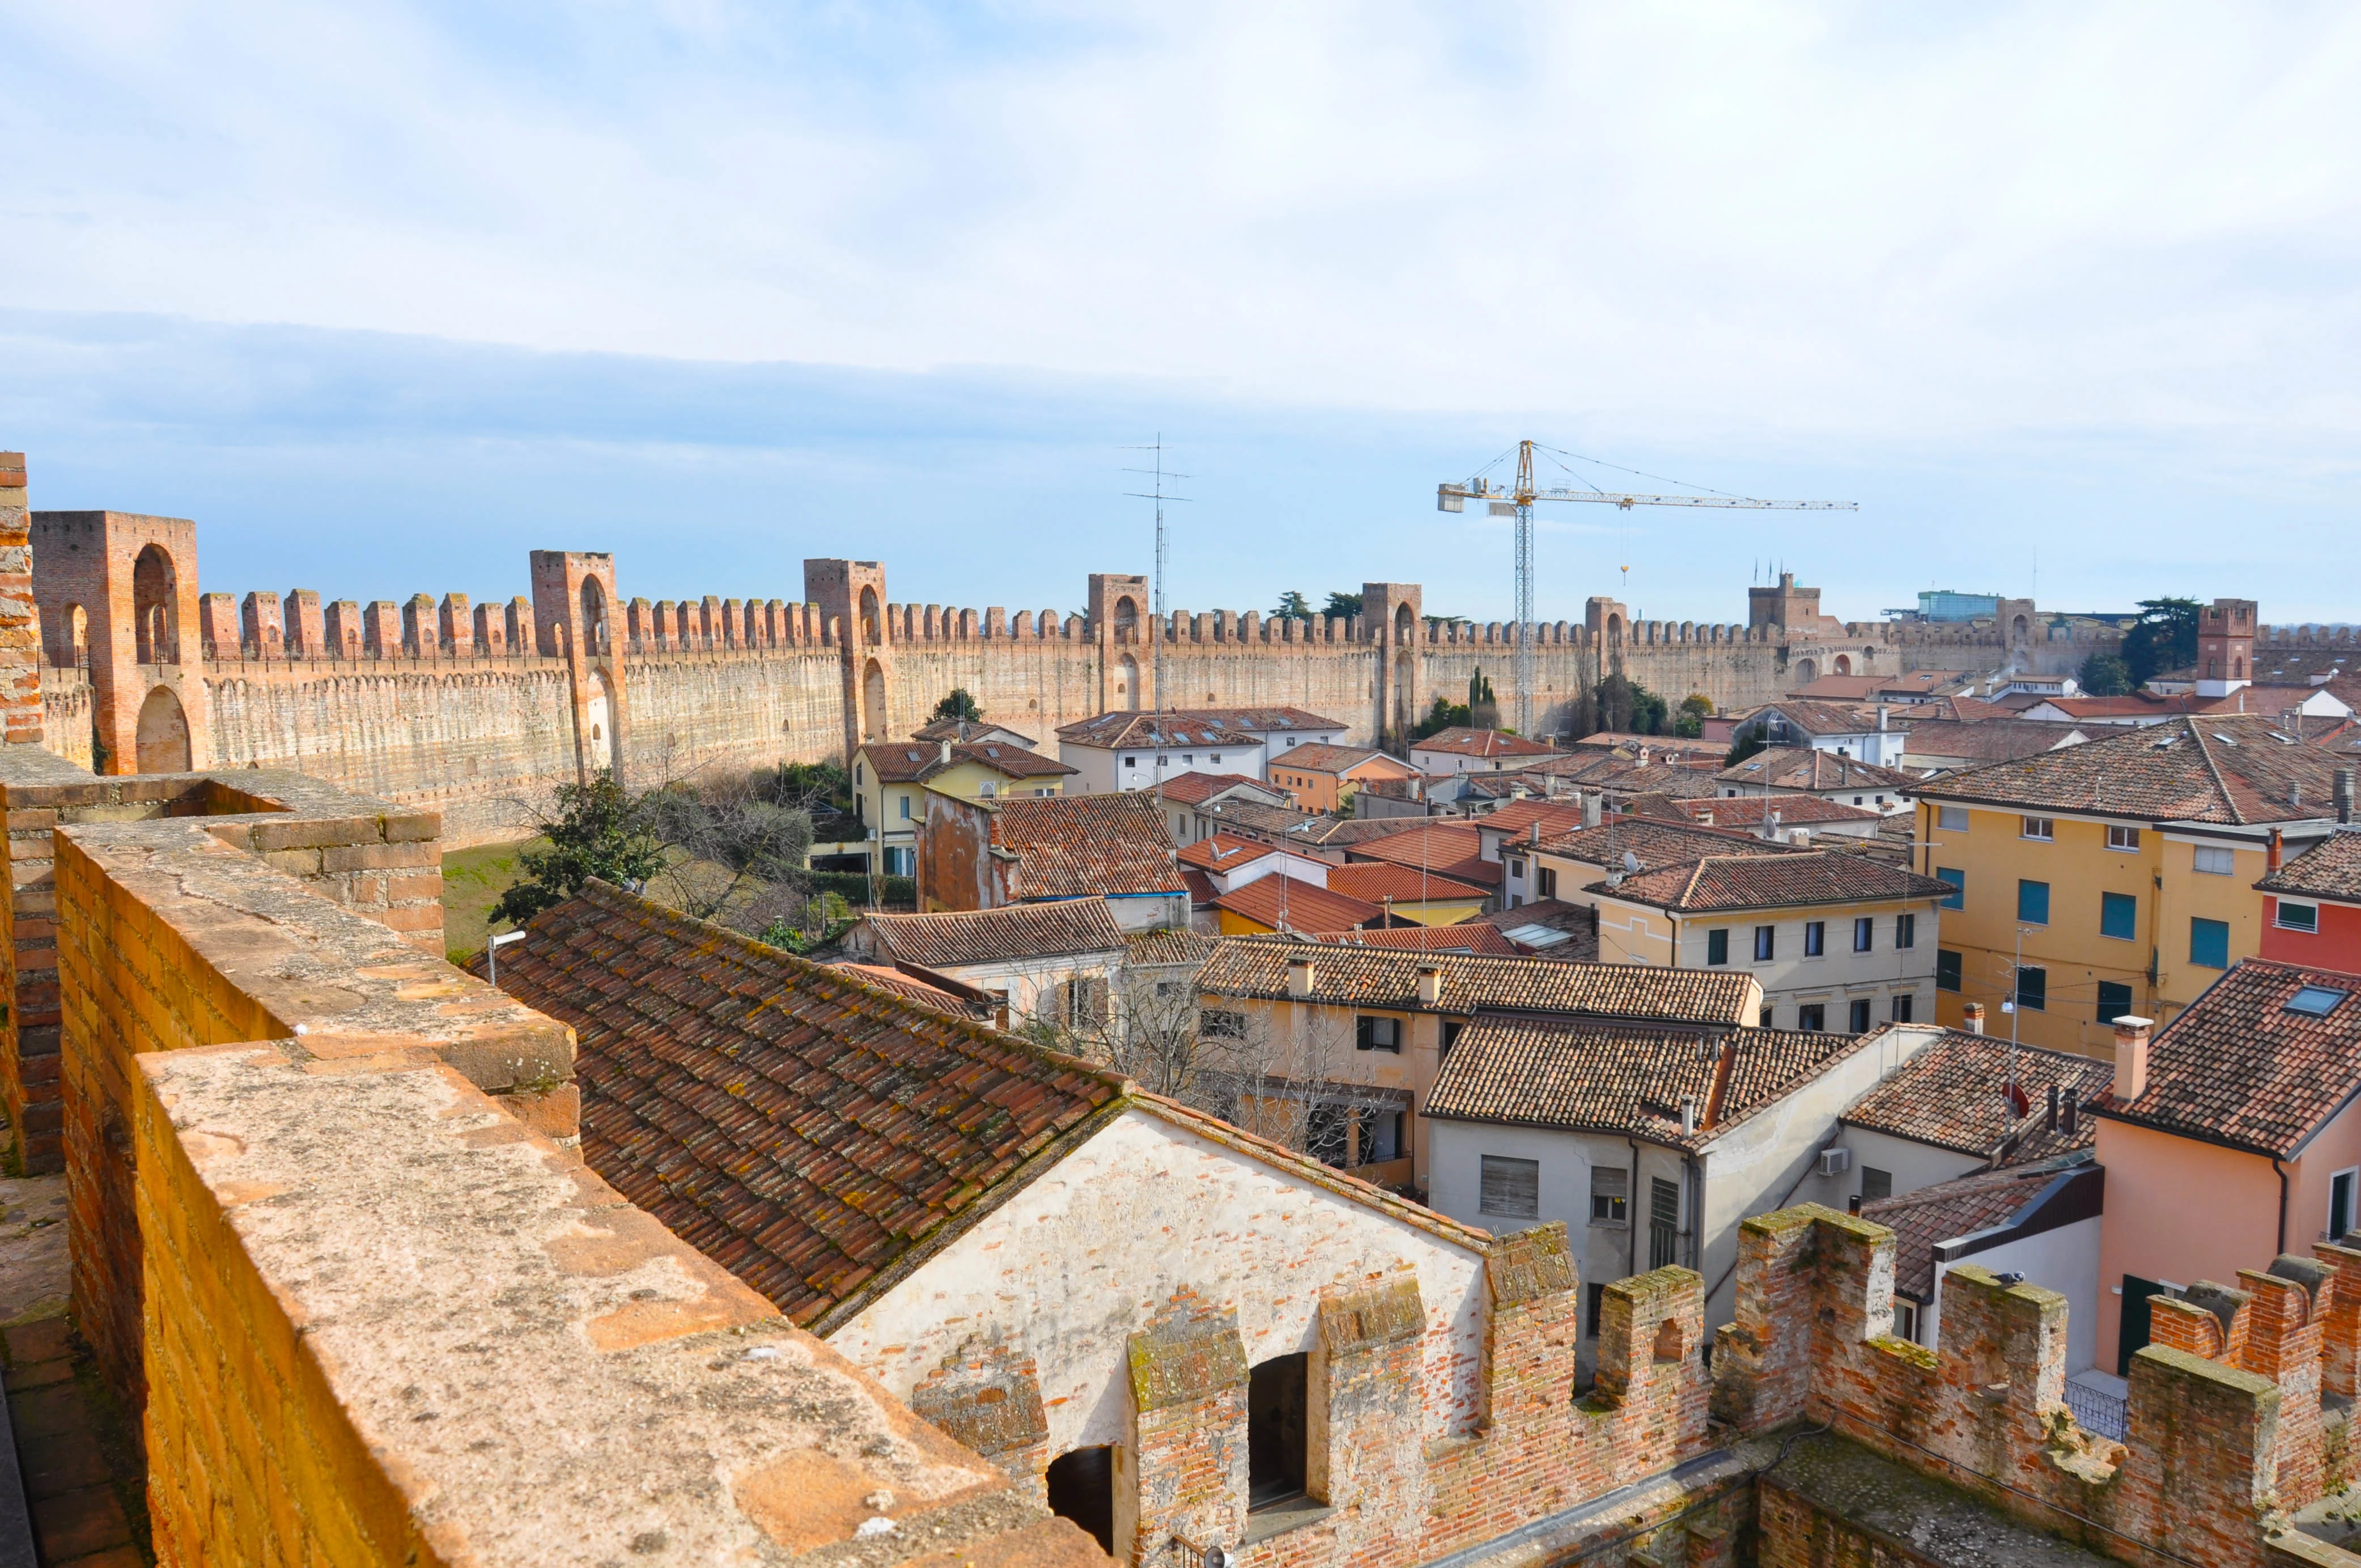 The medieval wall of the town of Cittadella in Italy with a crane in the distance - Veneto, Italy - www.rossiwrites.com